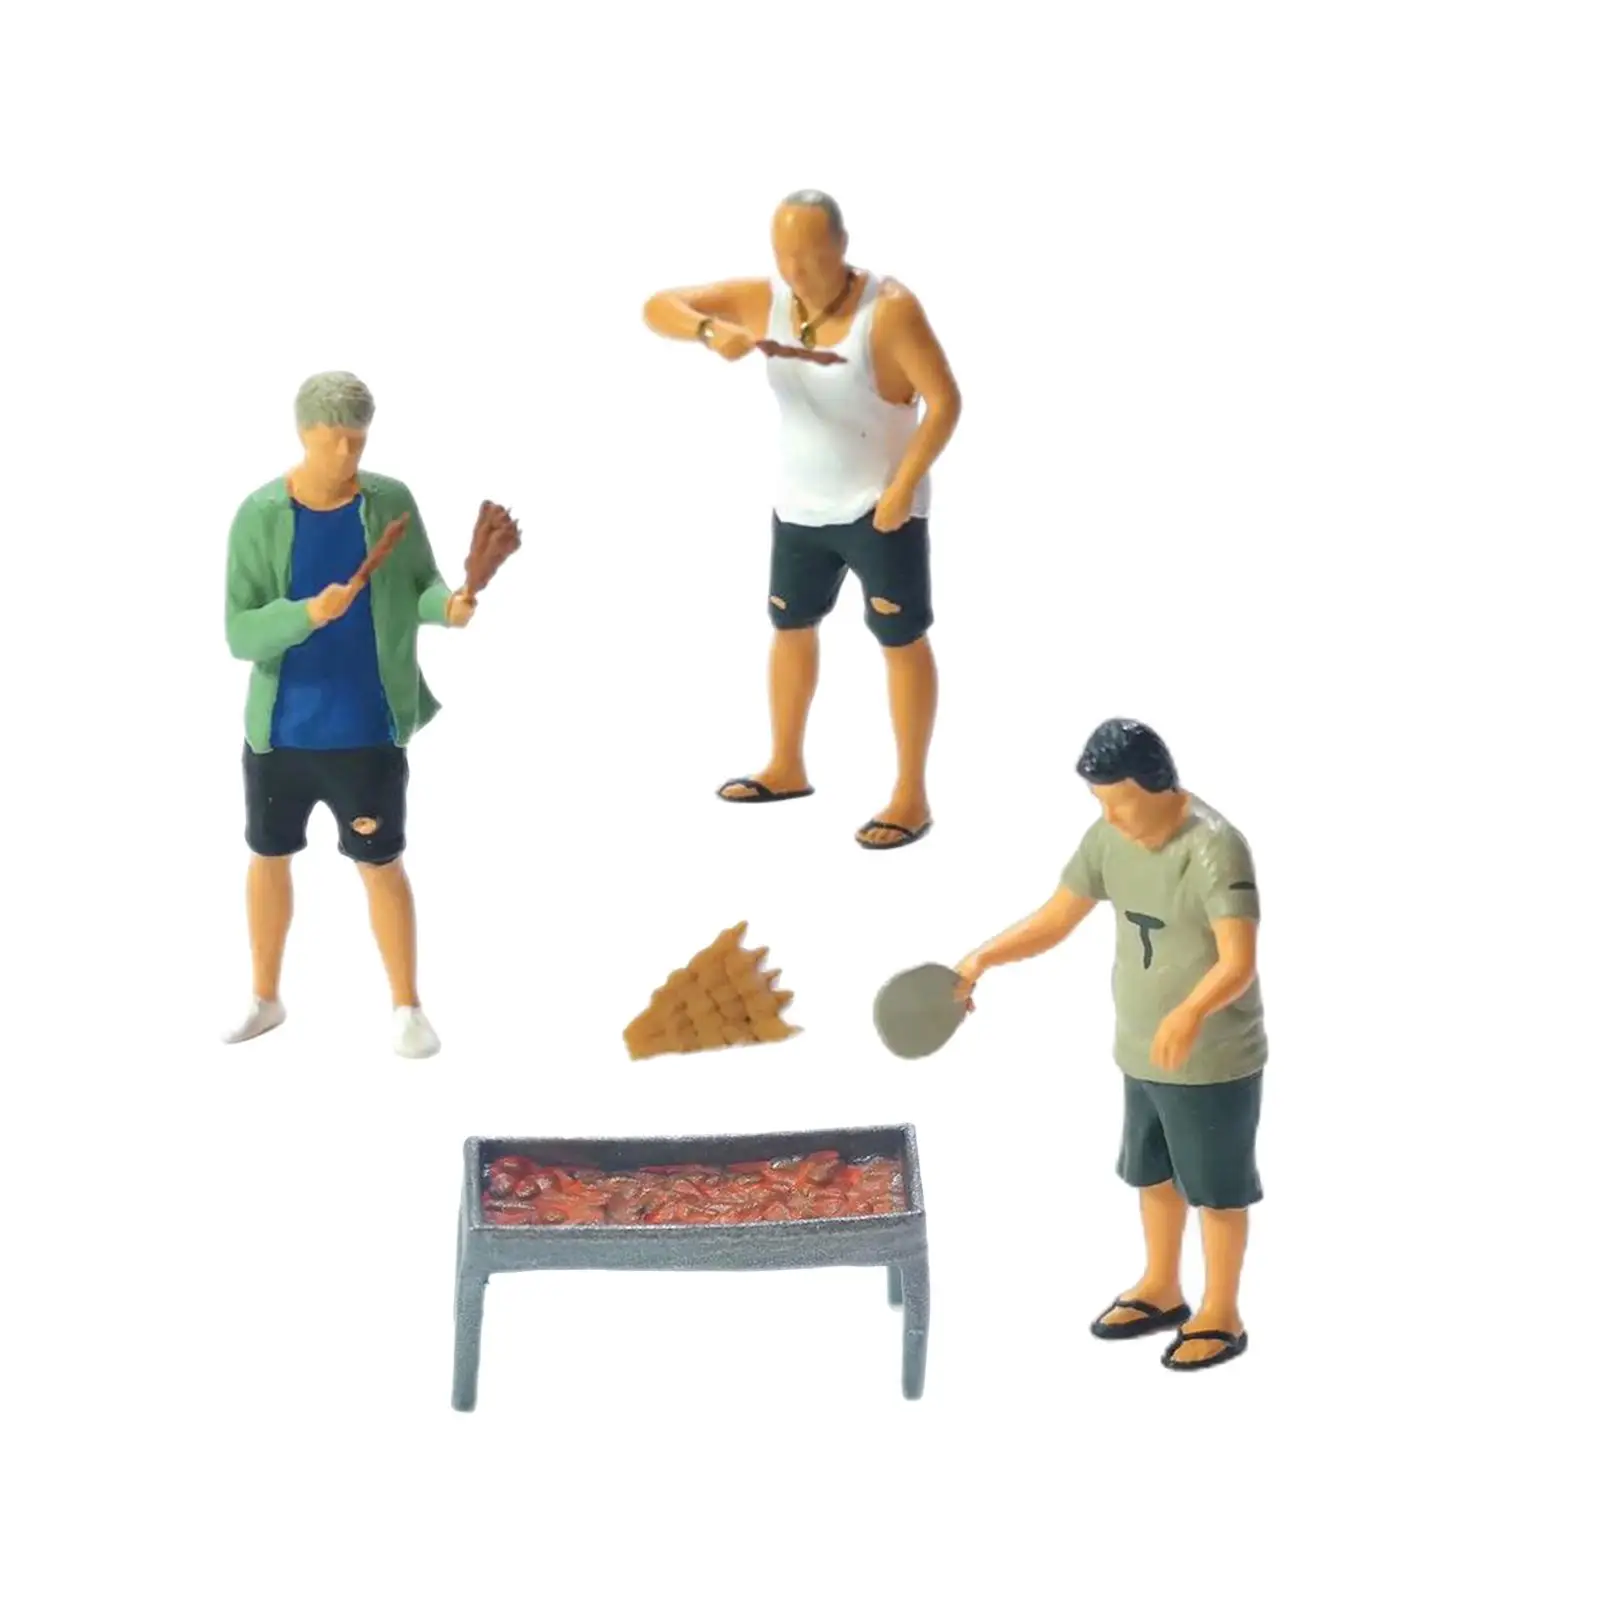 5x 1/64 BBQ People Figures Set Movie Props Layout Decoration with Accessories Desktop Ornament Resin Figurines Decoration